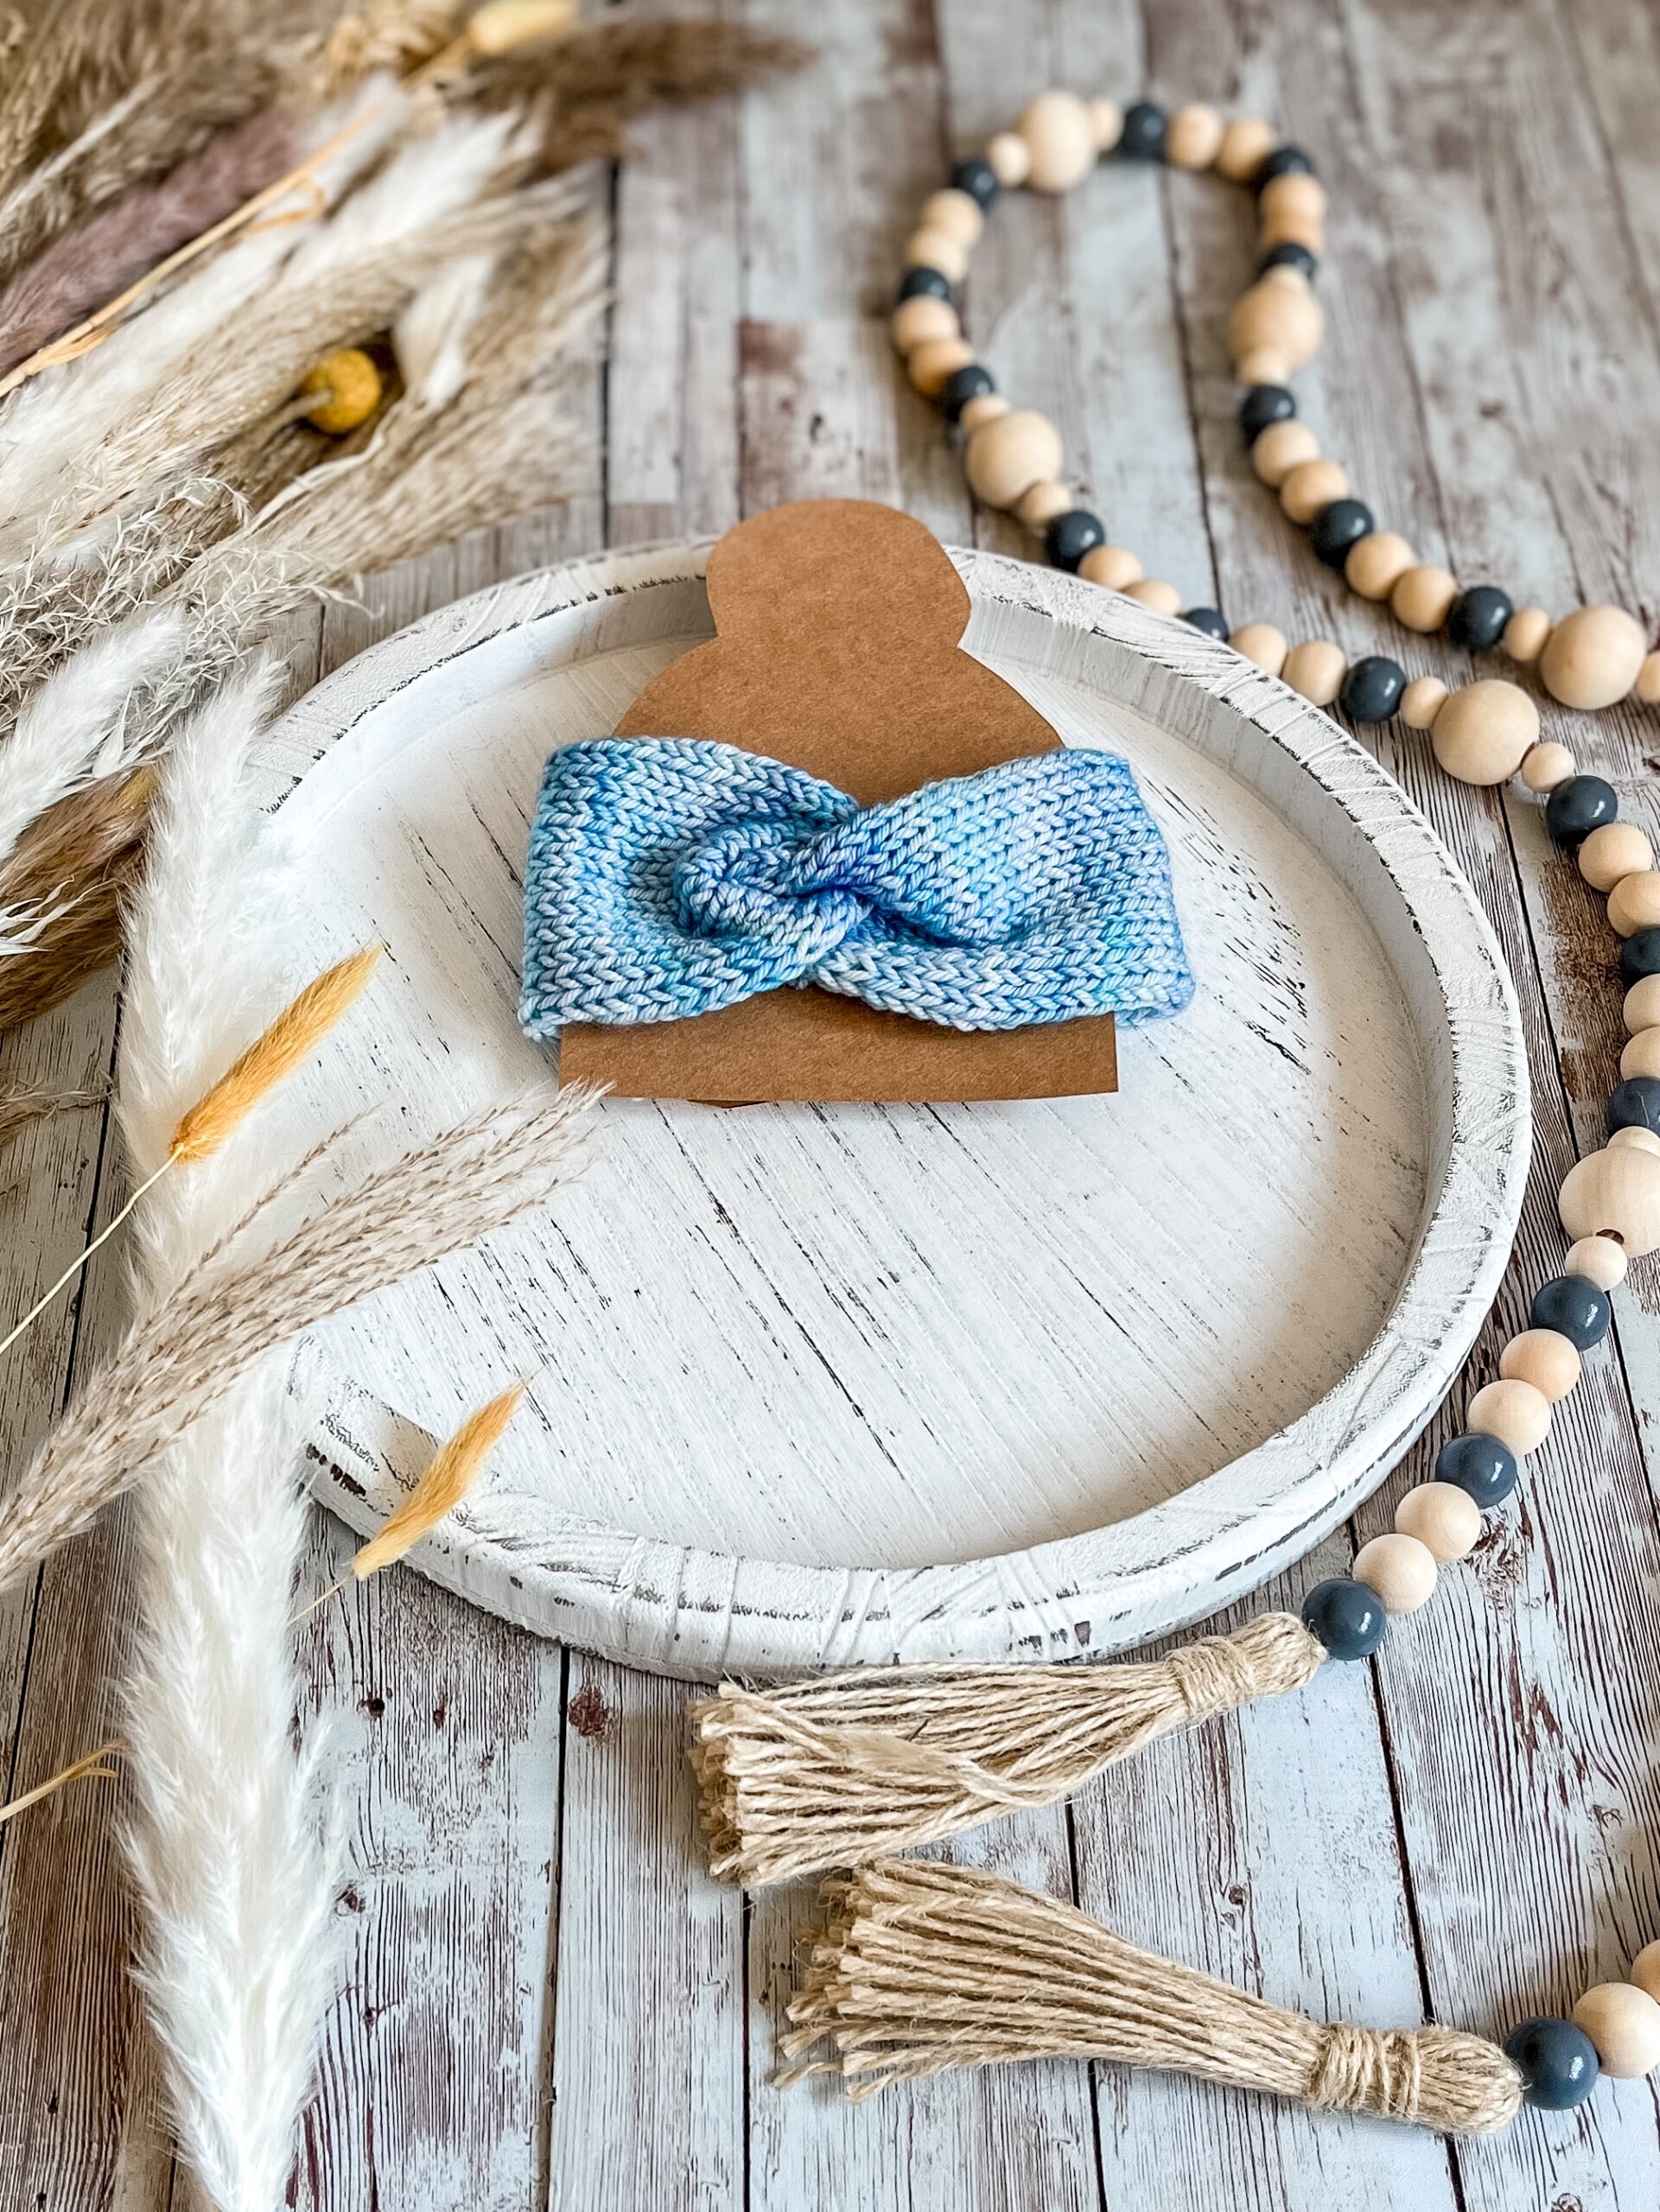 A blue, hand-dyed merino ear warmer is displayed on a kraft paper cutout of a messy bun on a whitewashed round wood platter. It is surrounded by wood beads on the right and faded pampas grass on the left, all on a wood plank panel